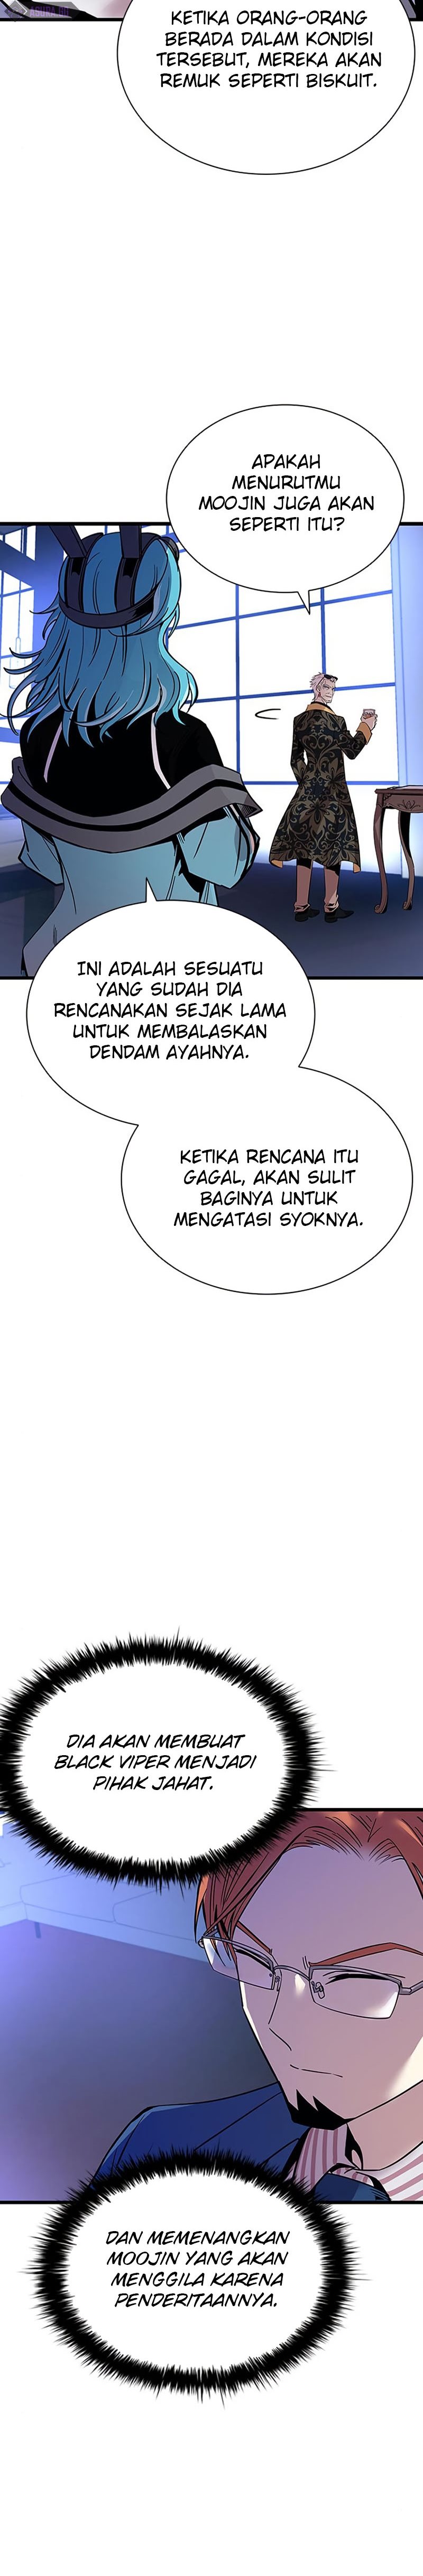 kill-to-villain-indo Chapter chapter-79